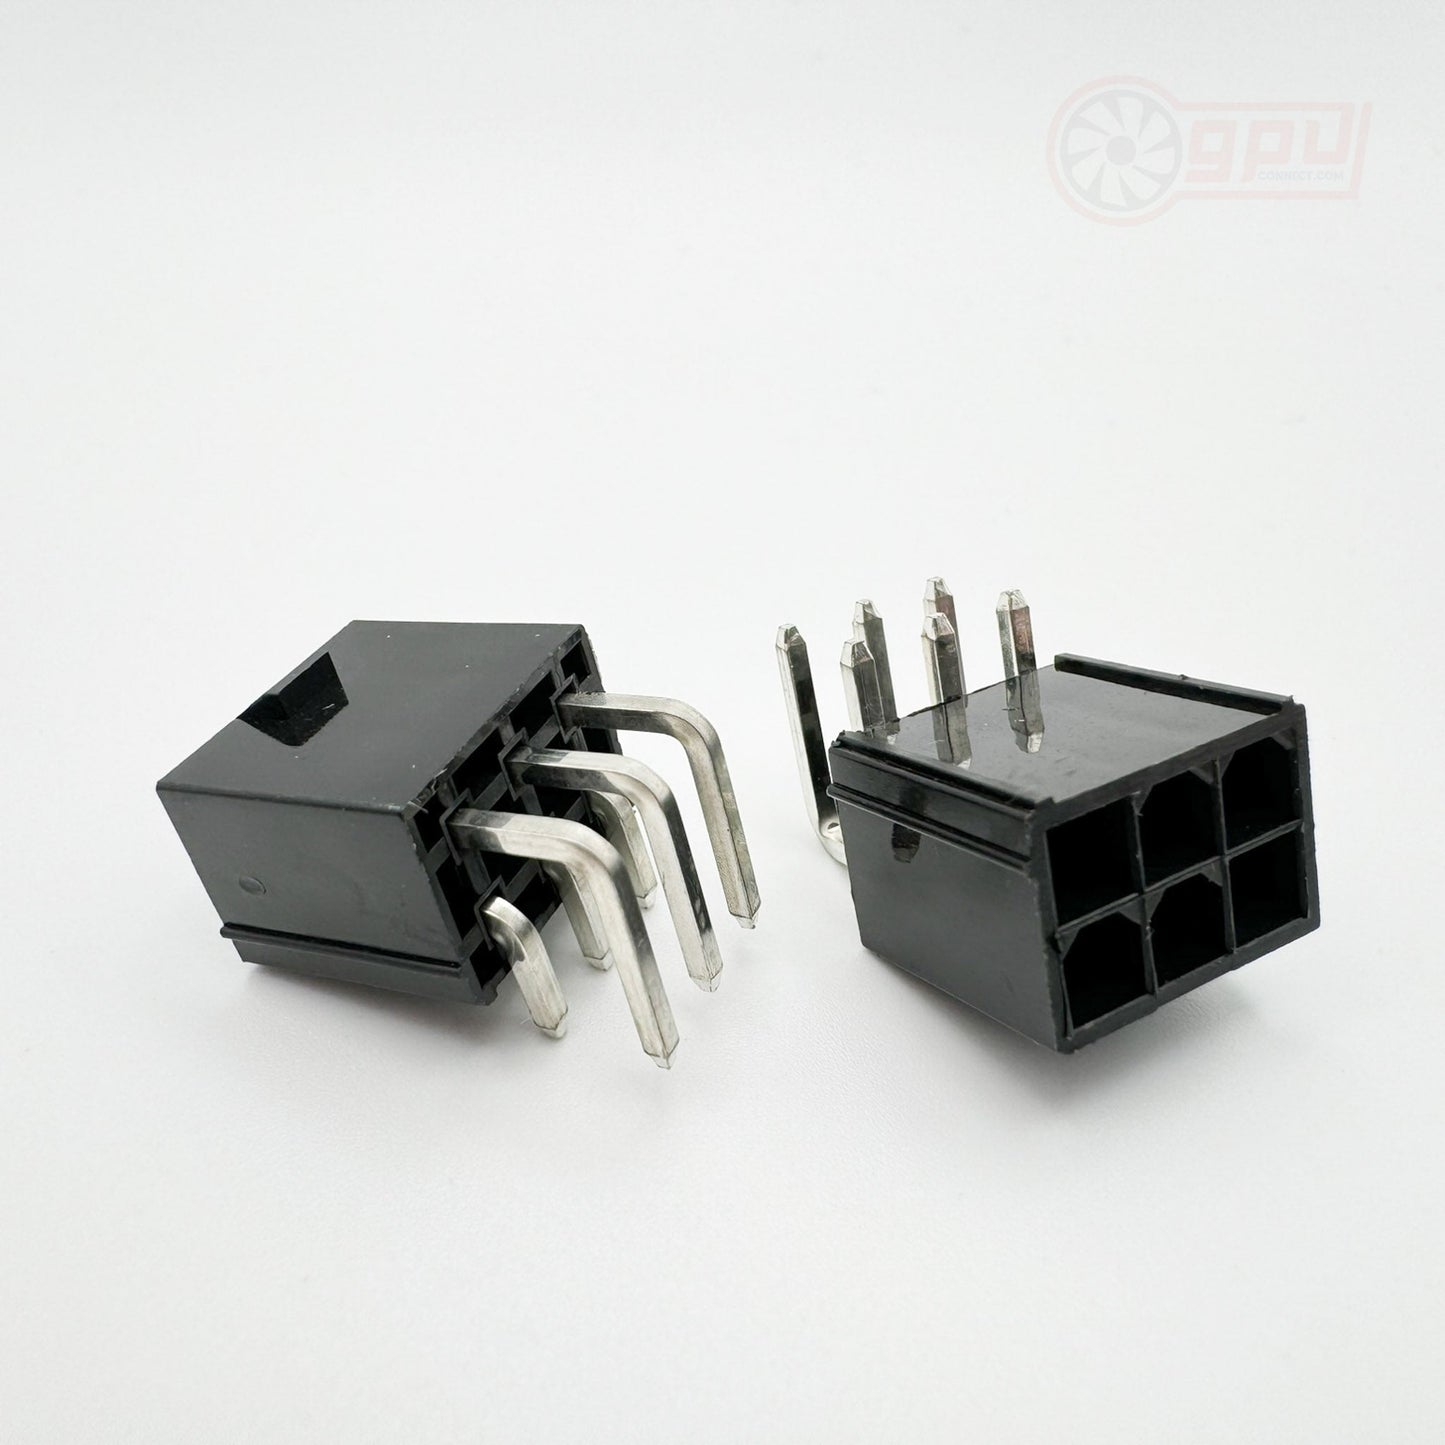 6-Pin PCI-Express PCIE Replacement Power Connector for Graphics Cards GPU - GPUCONNECT.COM